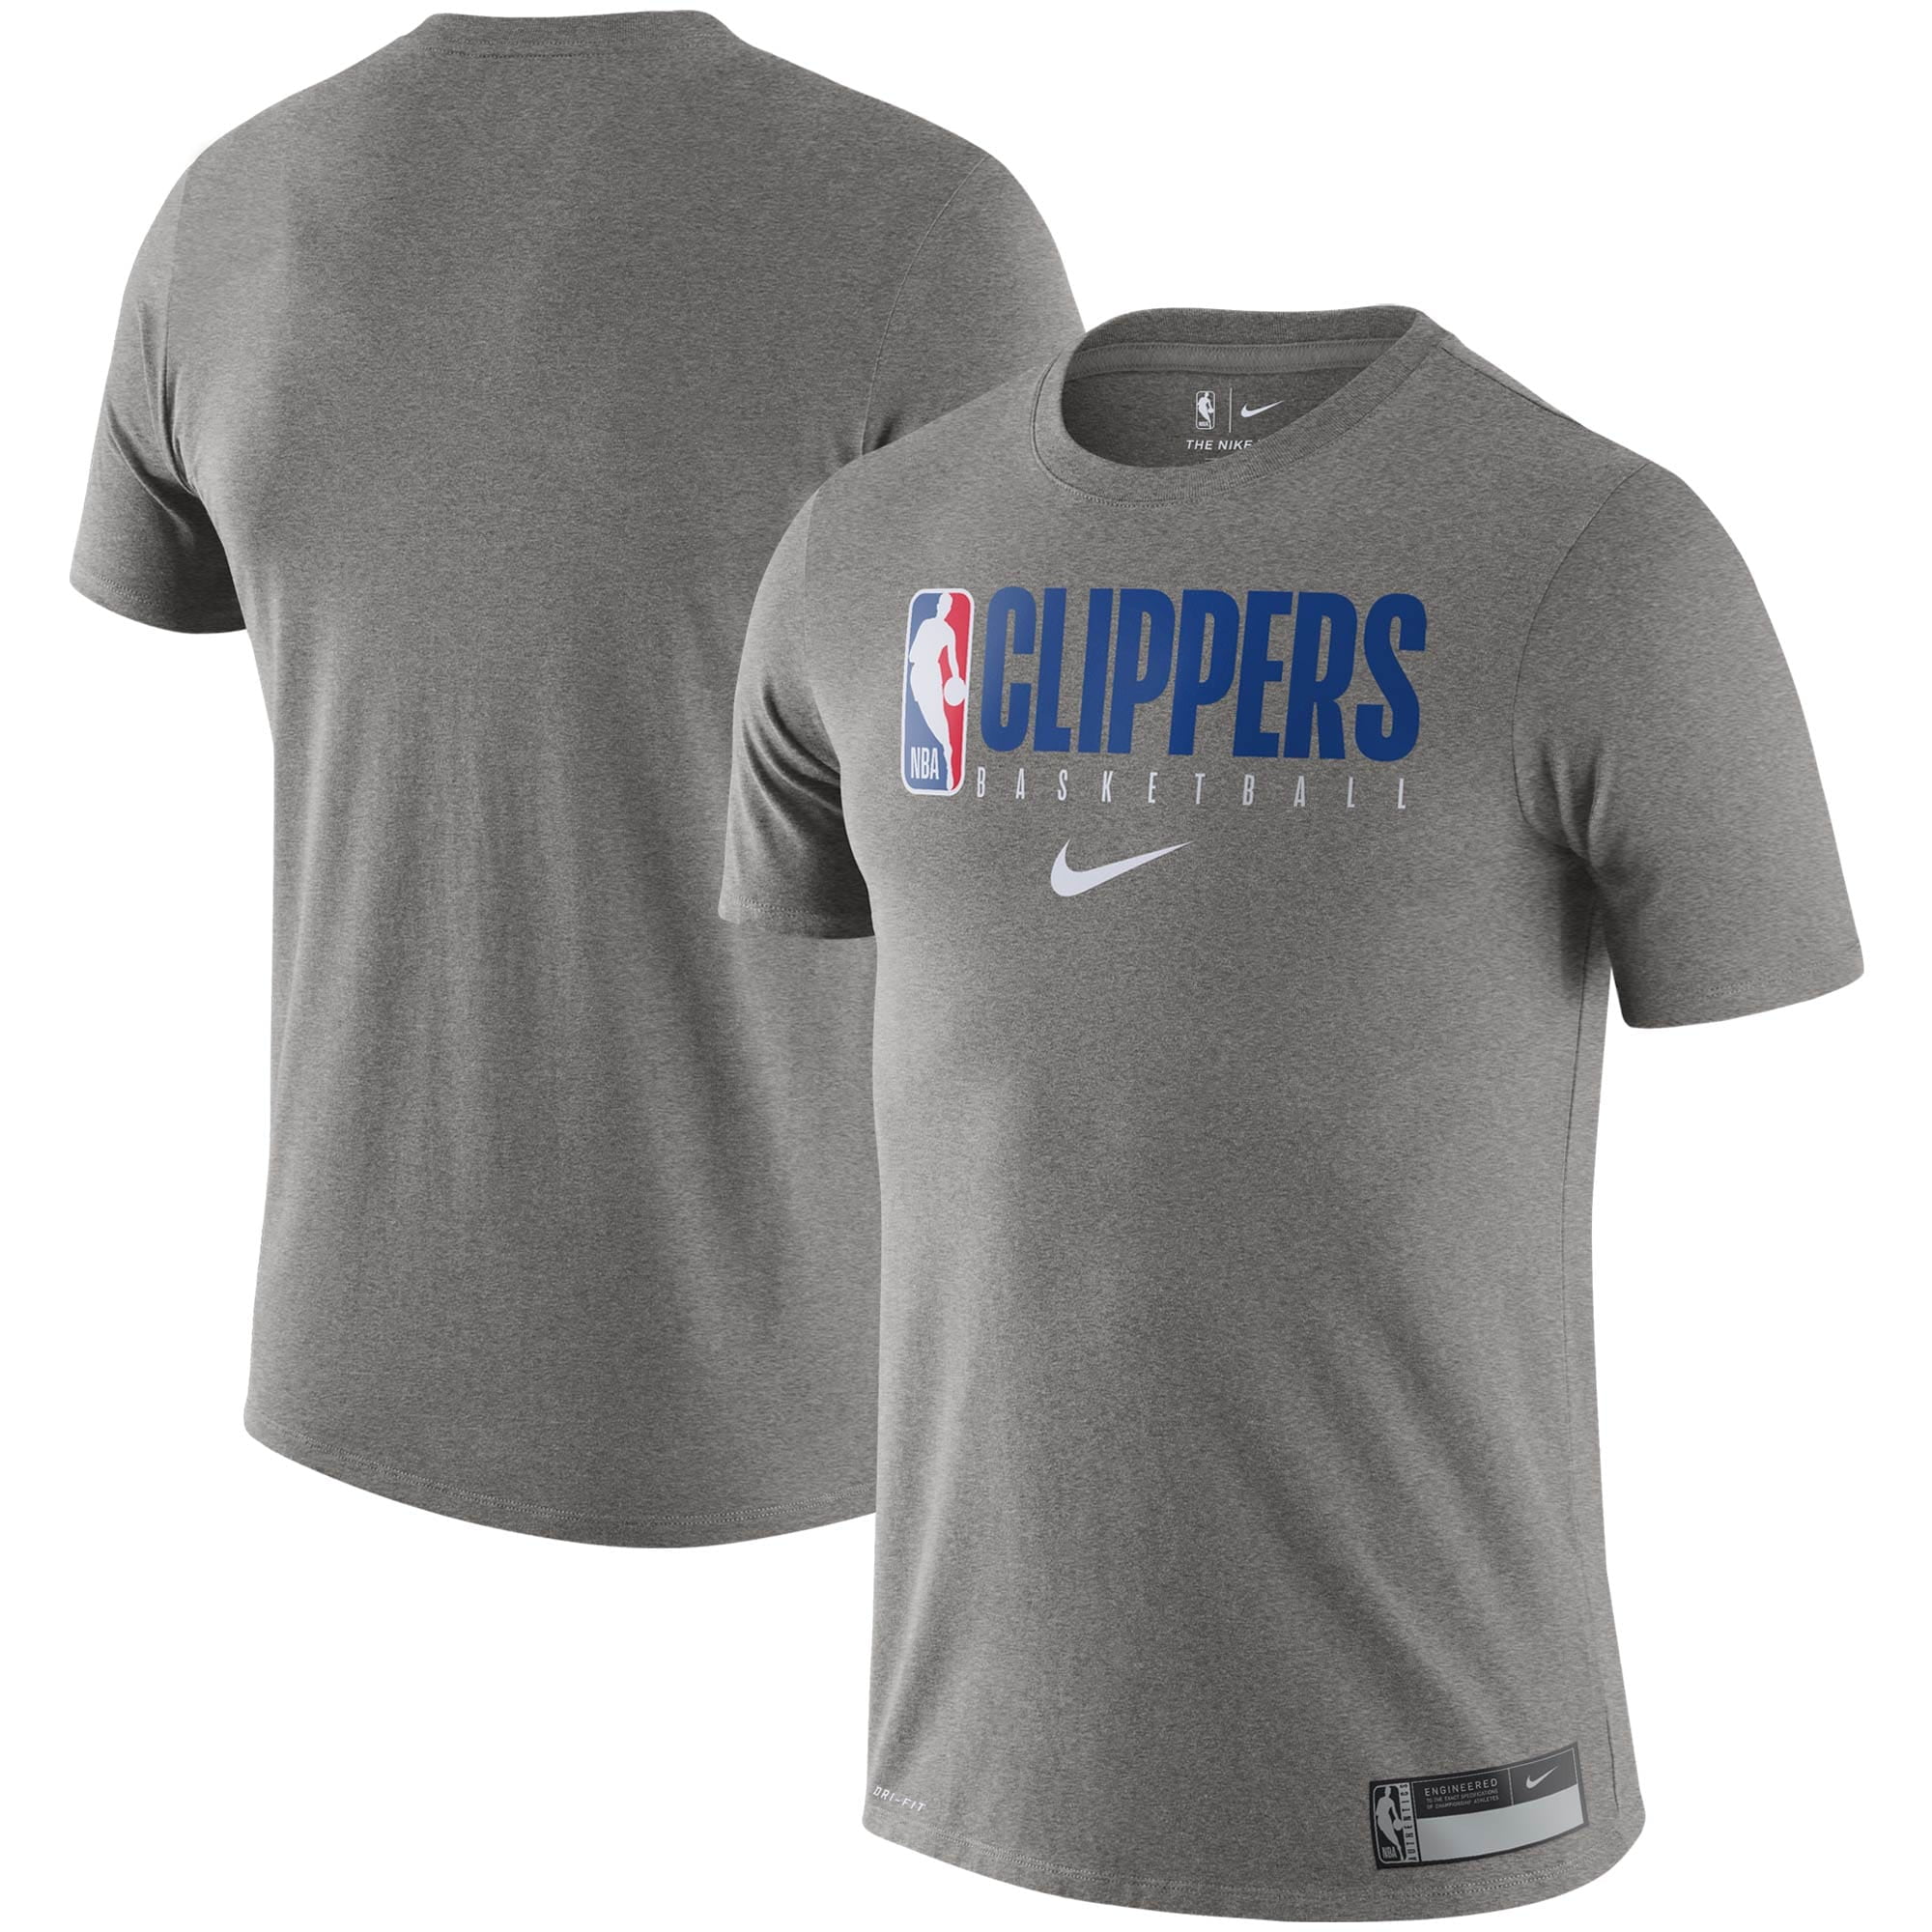 la clippers clothing